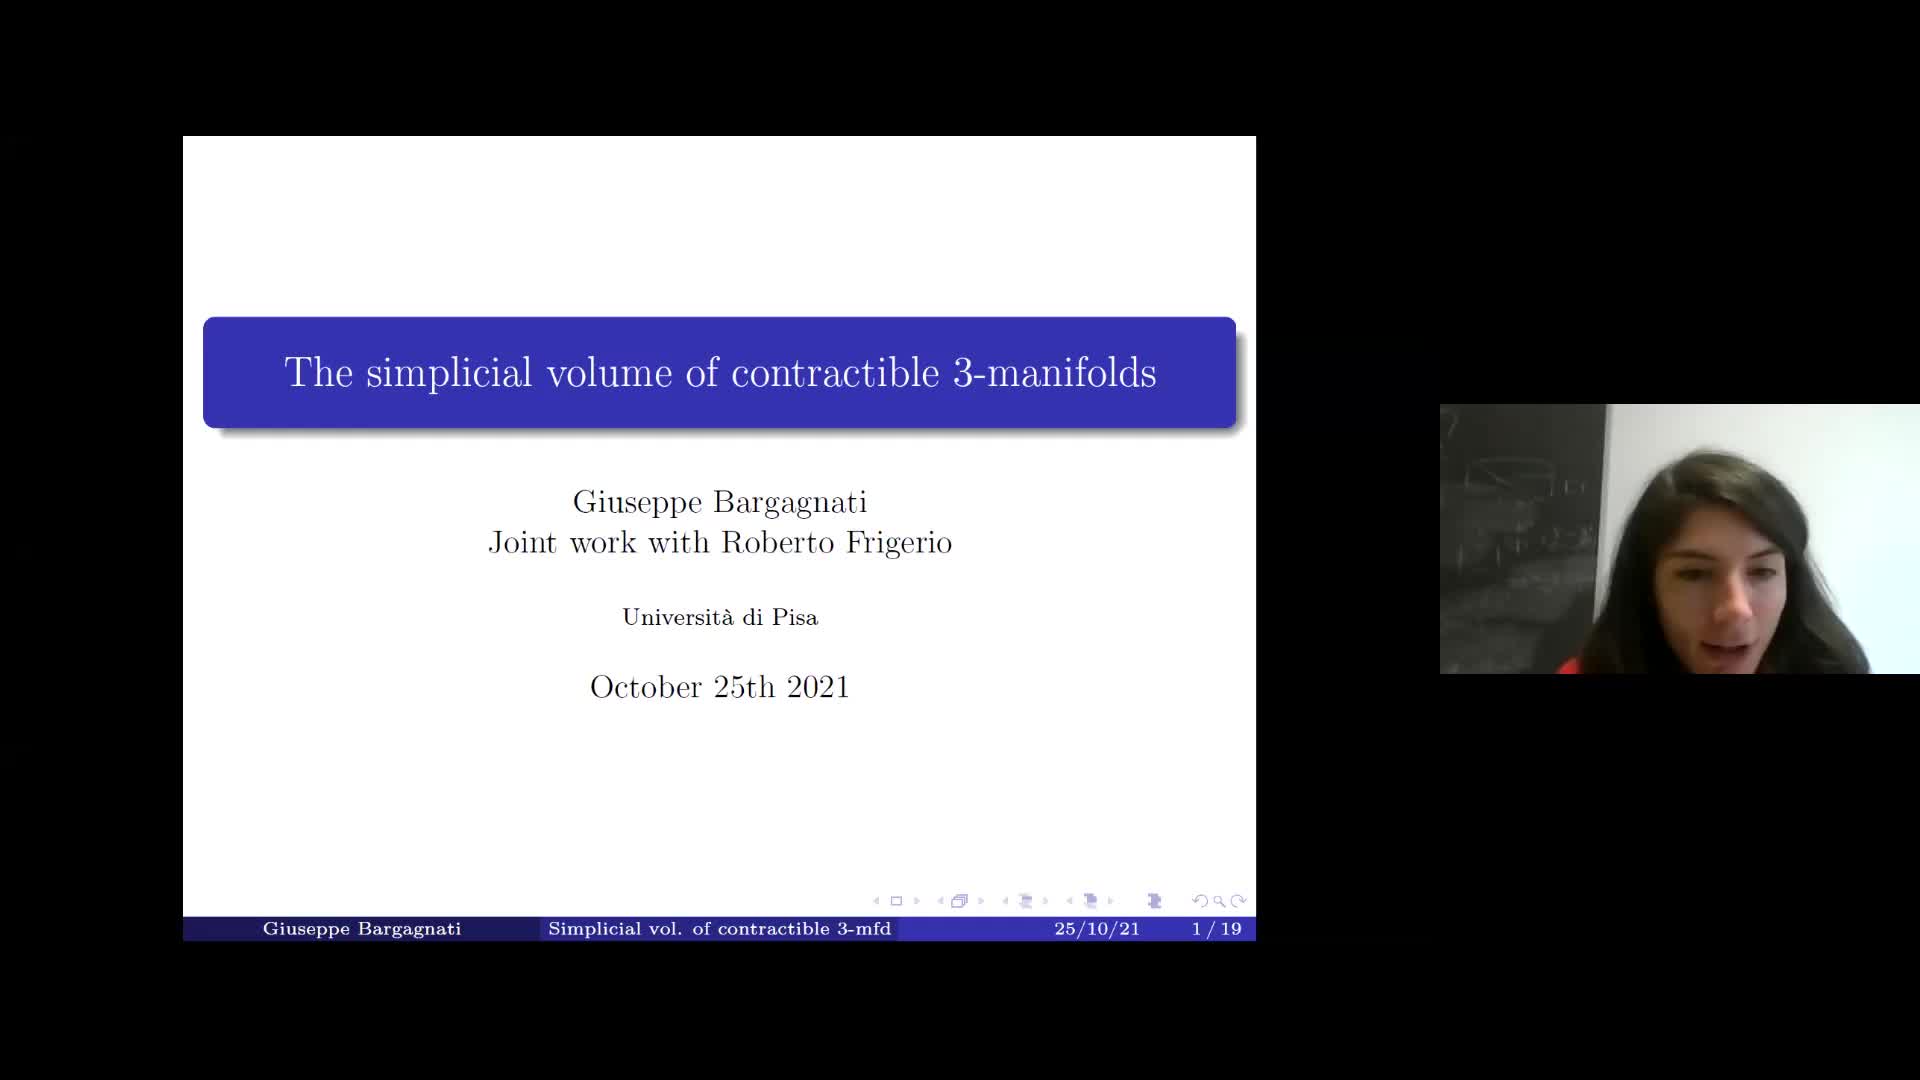 The simplicial volume of contractible 3-manifolds